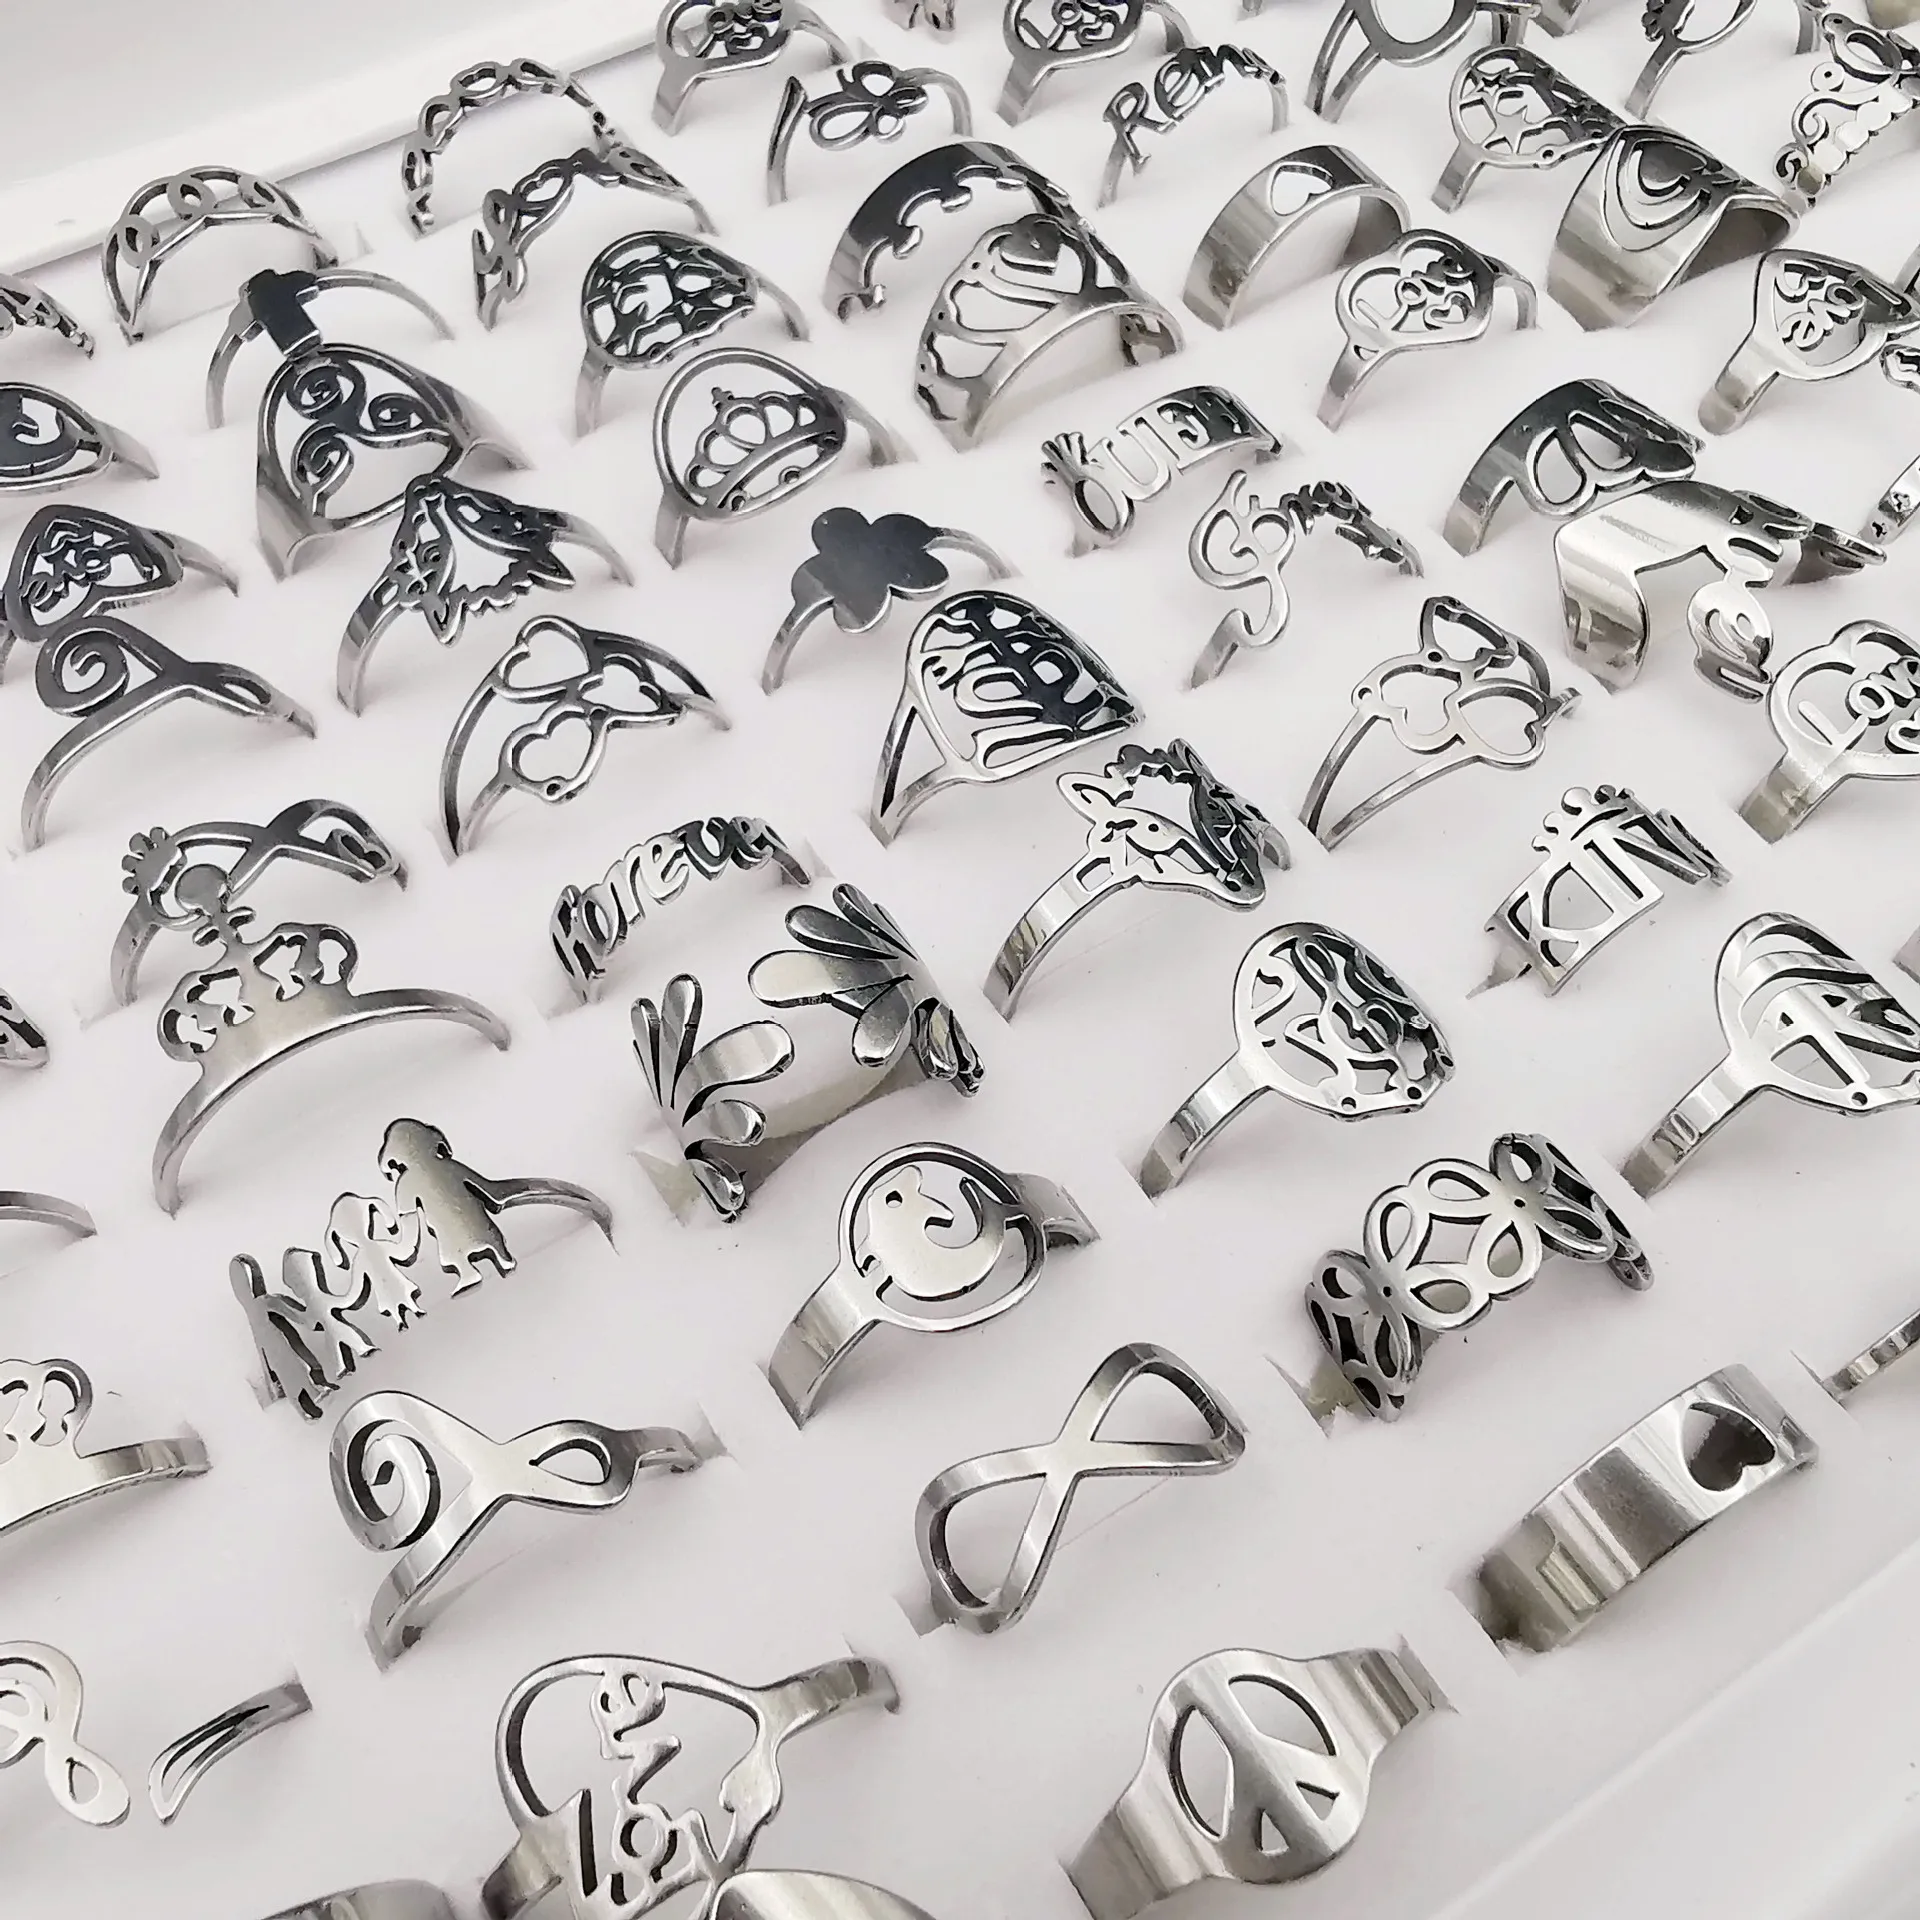 

50 Pieces Wholesale high quality rings bulk stainless steel rings mixed animal love heart letter butterfly flower lot rings